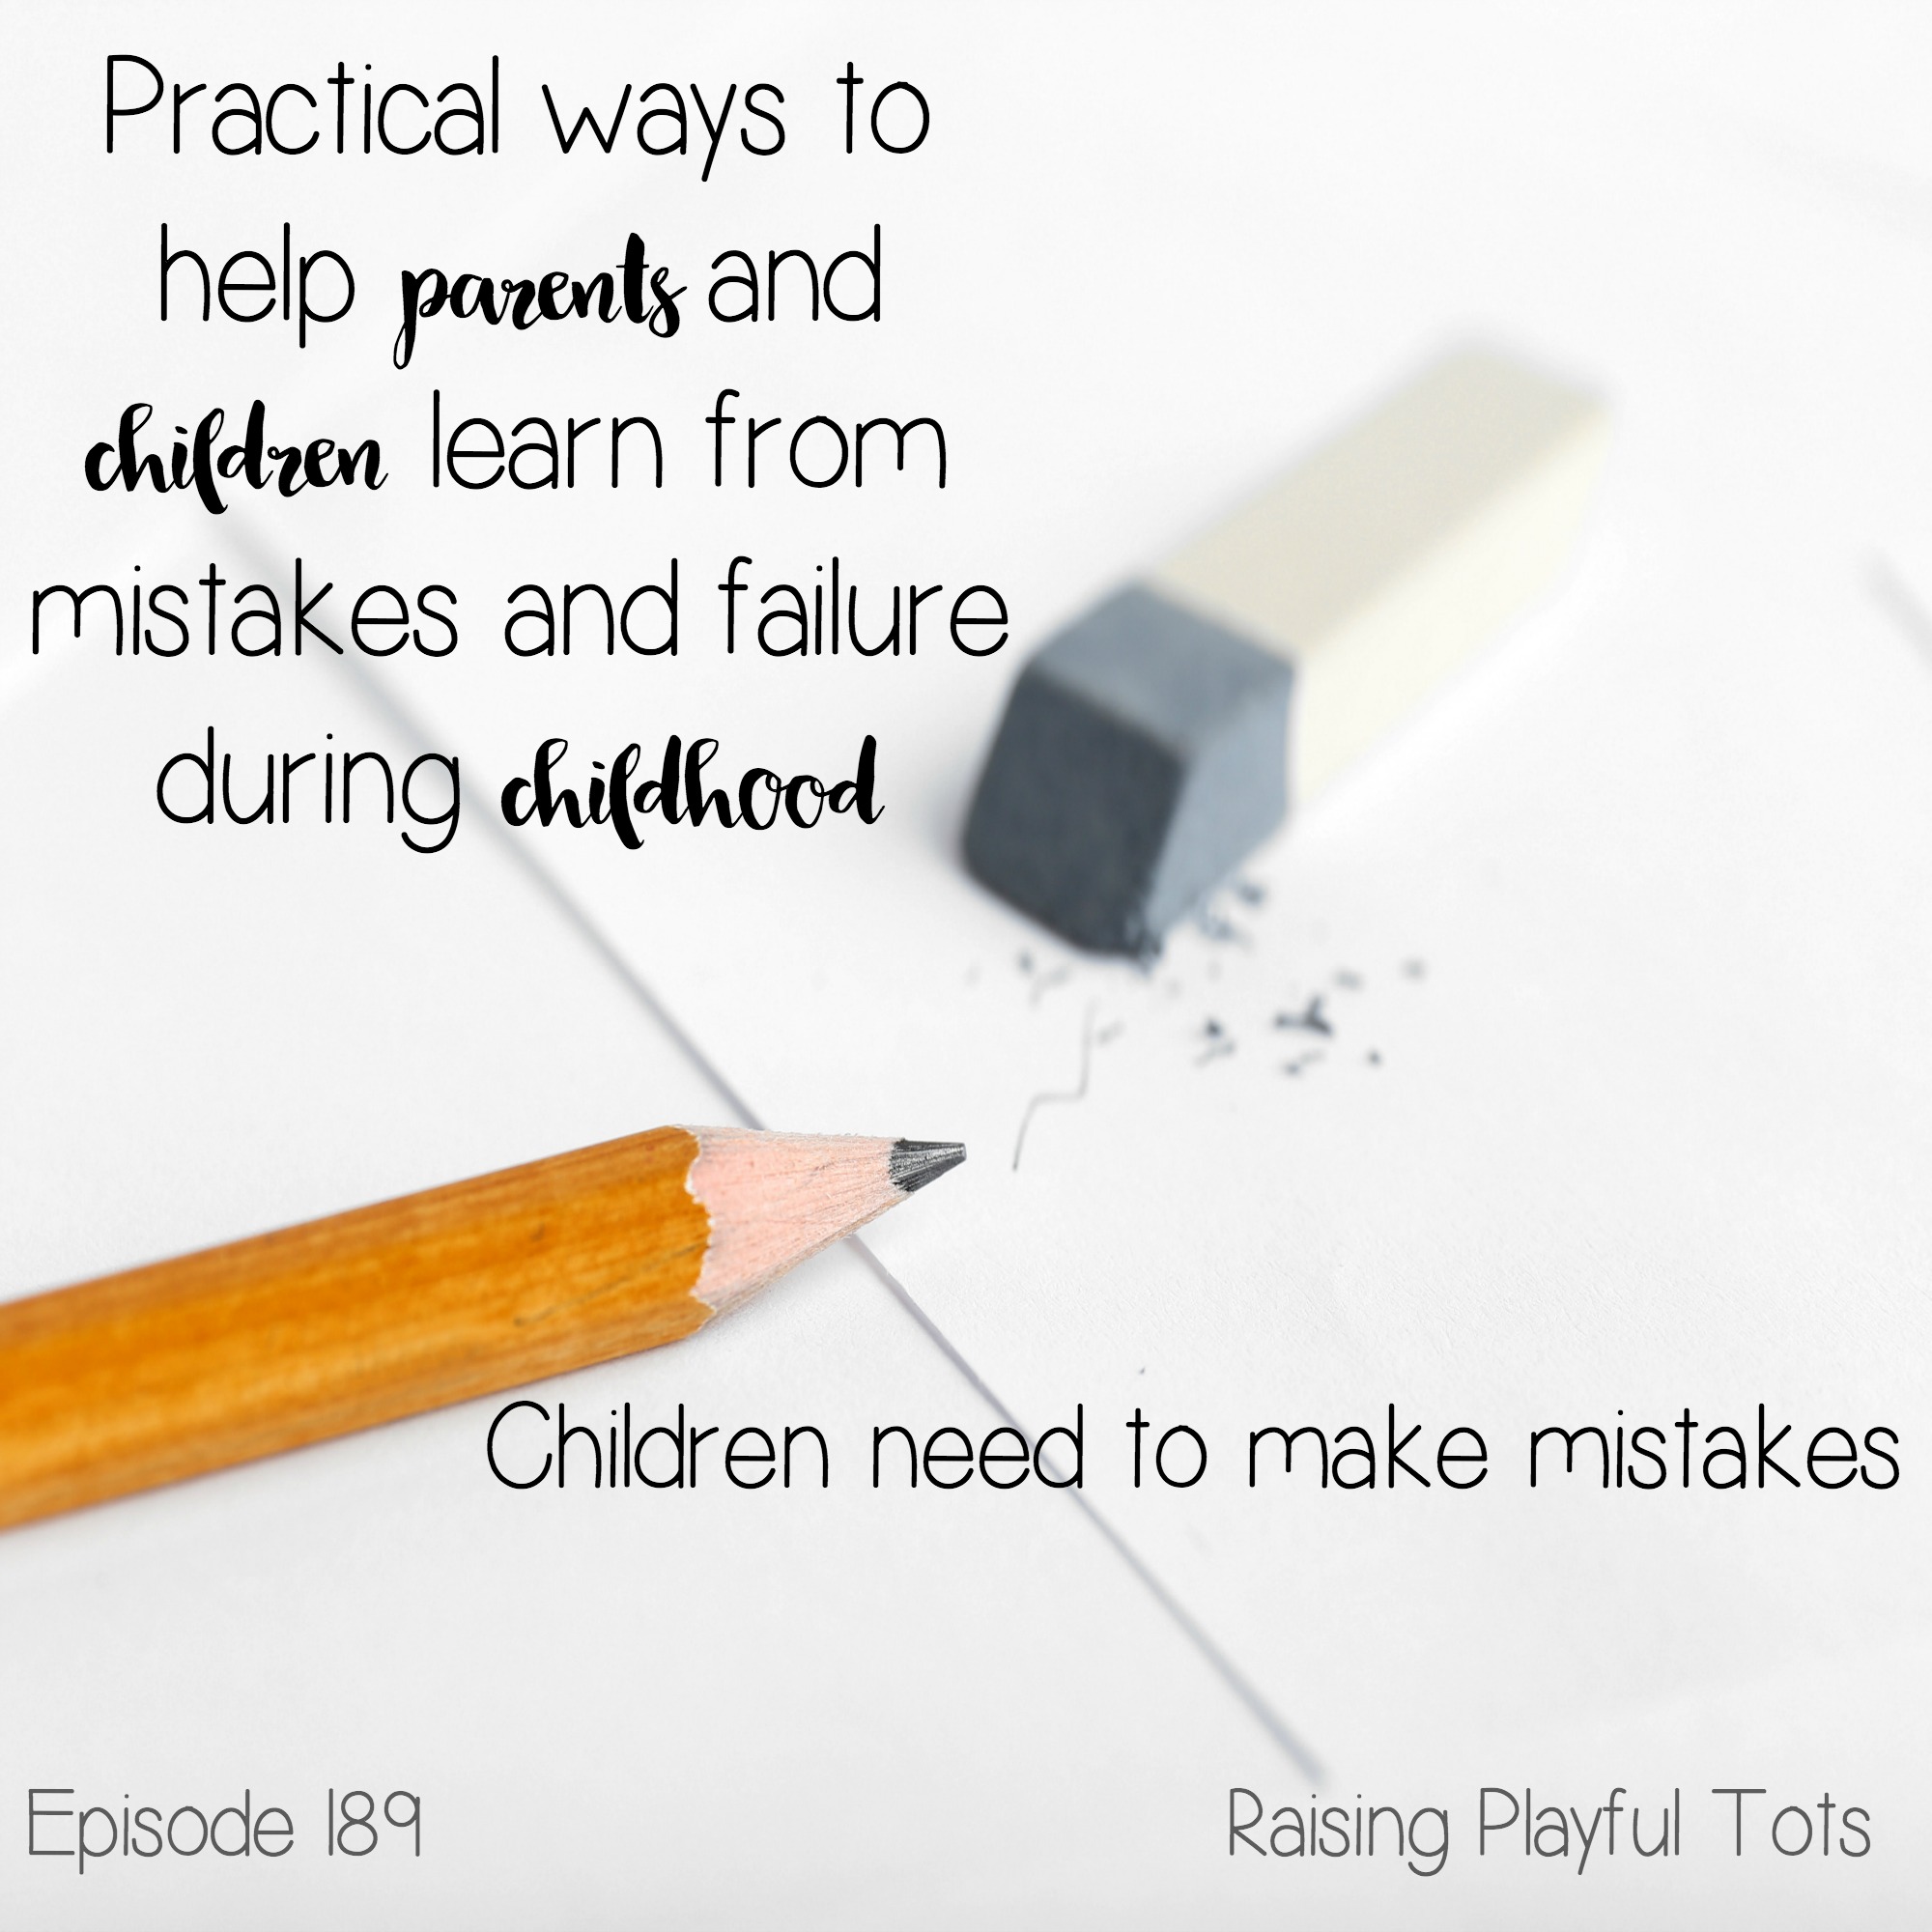 Are you ever tempted to just correct this little bit on their homework without them there? Practical ways to help parents and children learn from mistakes and failure during childhood. Children need to make mistakes and we can show them how to respond to the mistake and failure